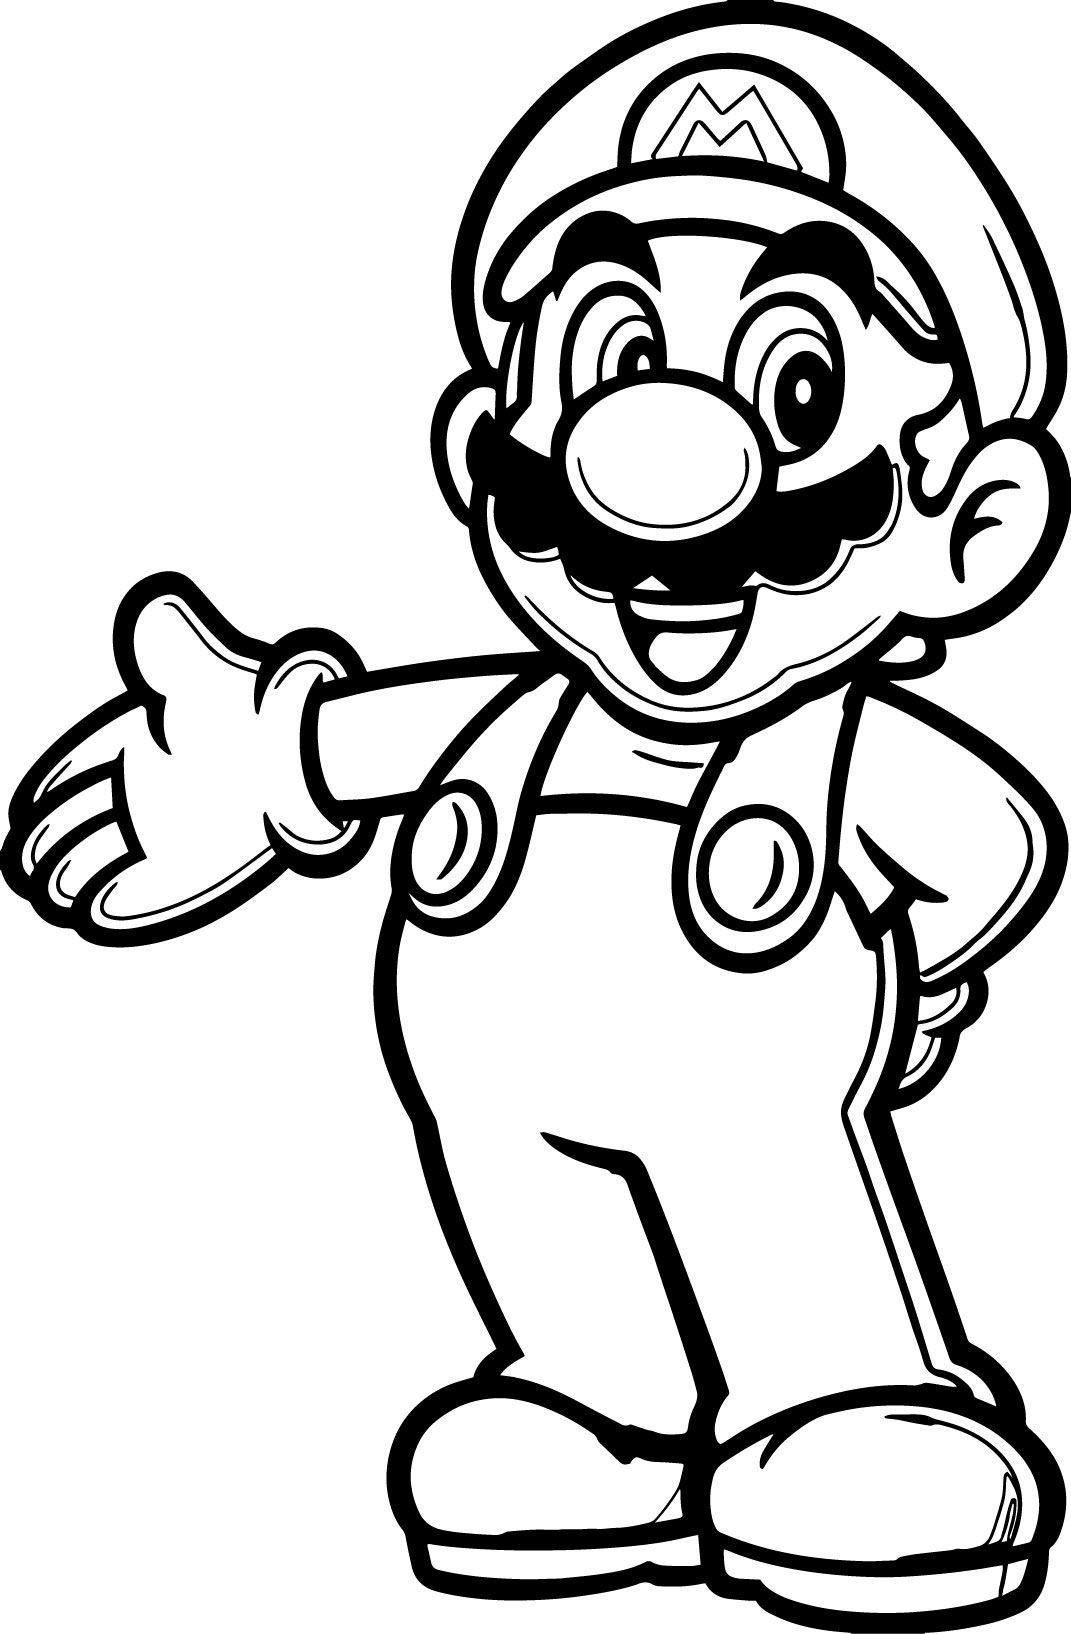 Mario Odyssey Coloring Pages at Free